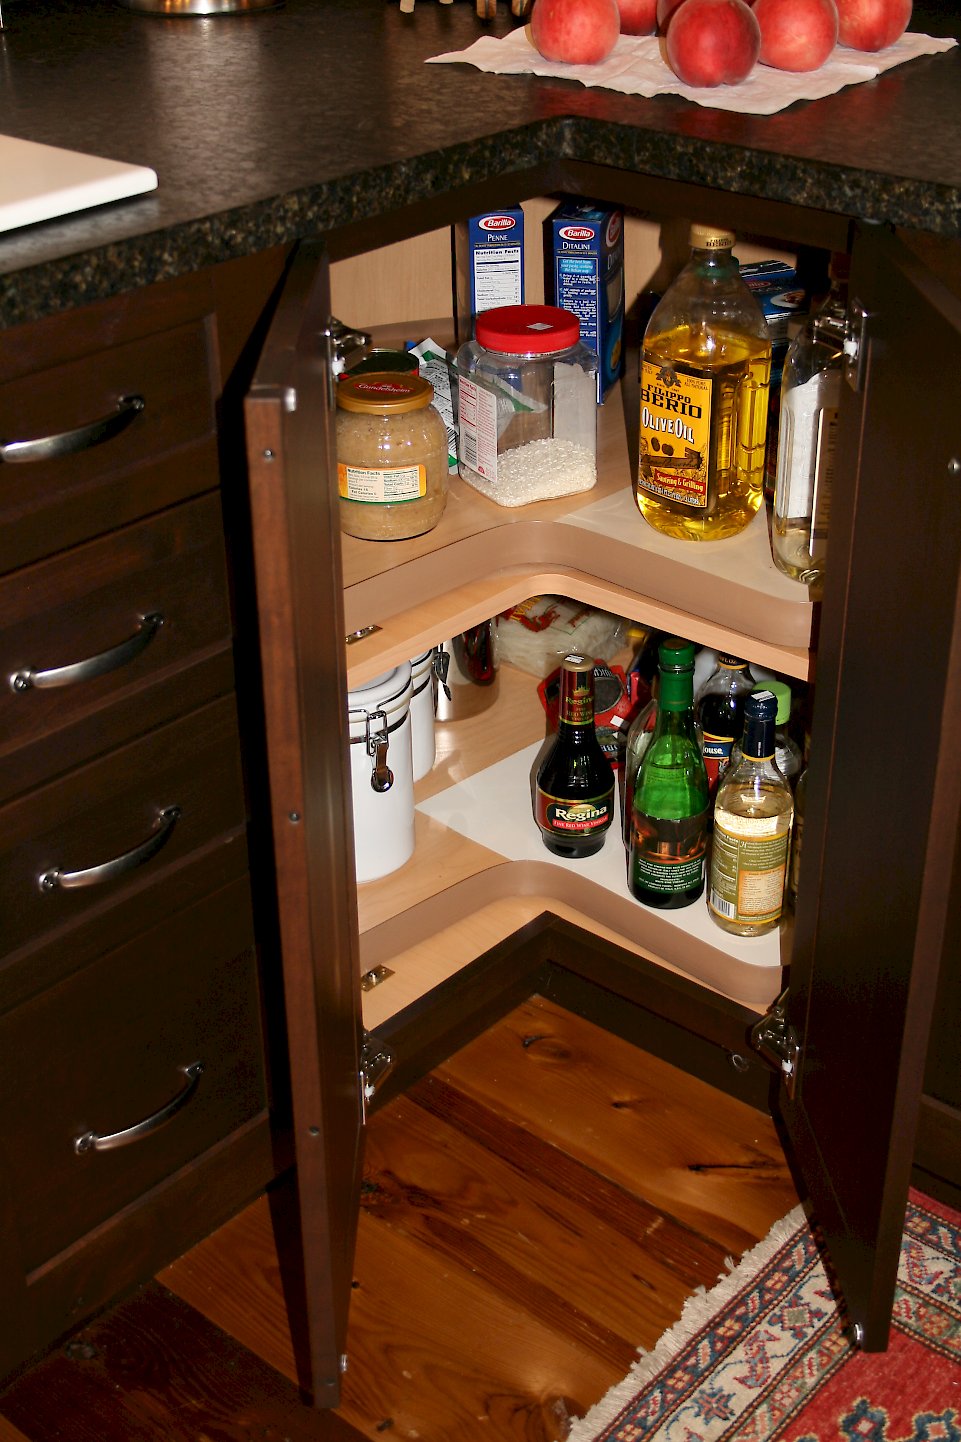 Lazy Susan shelving in the corner.